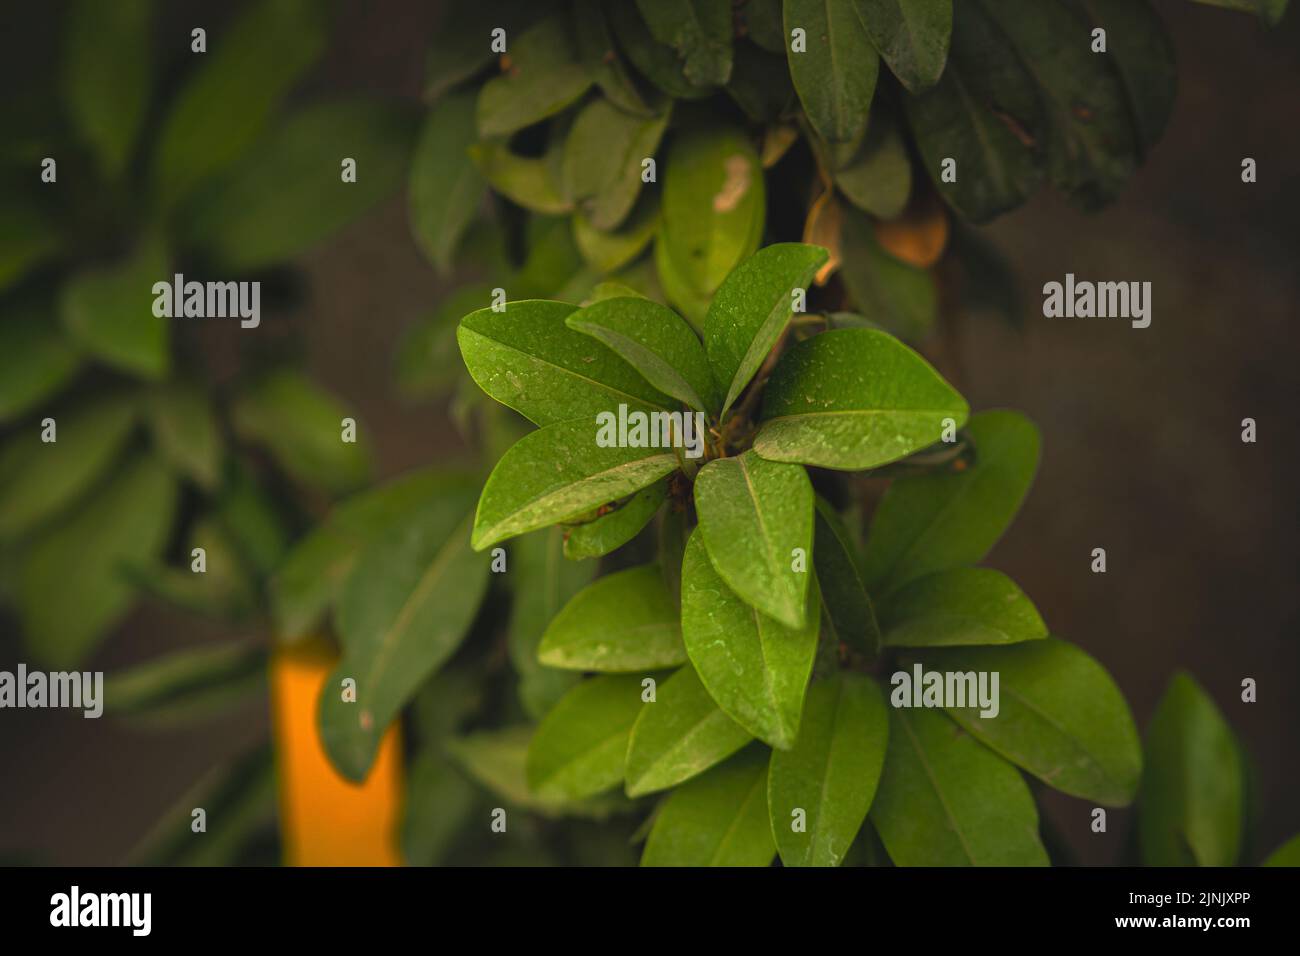 A closeup of Excoecaria agallocha plant green leaves in a garden Stock Photo